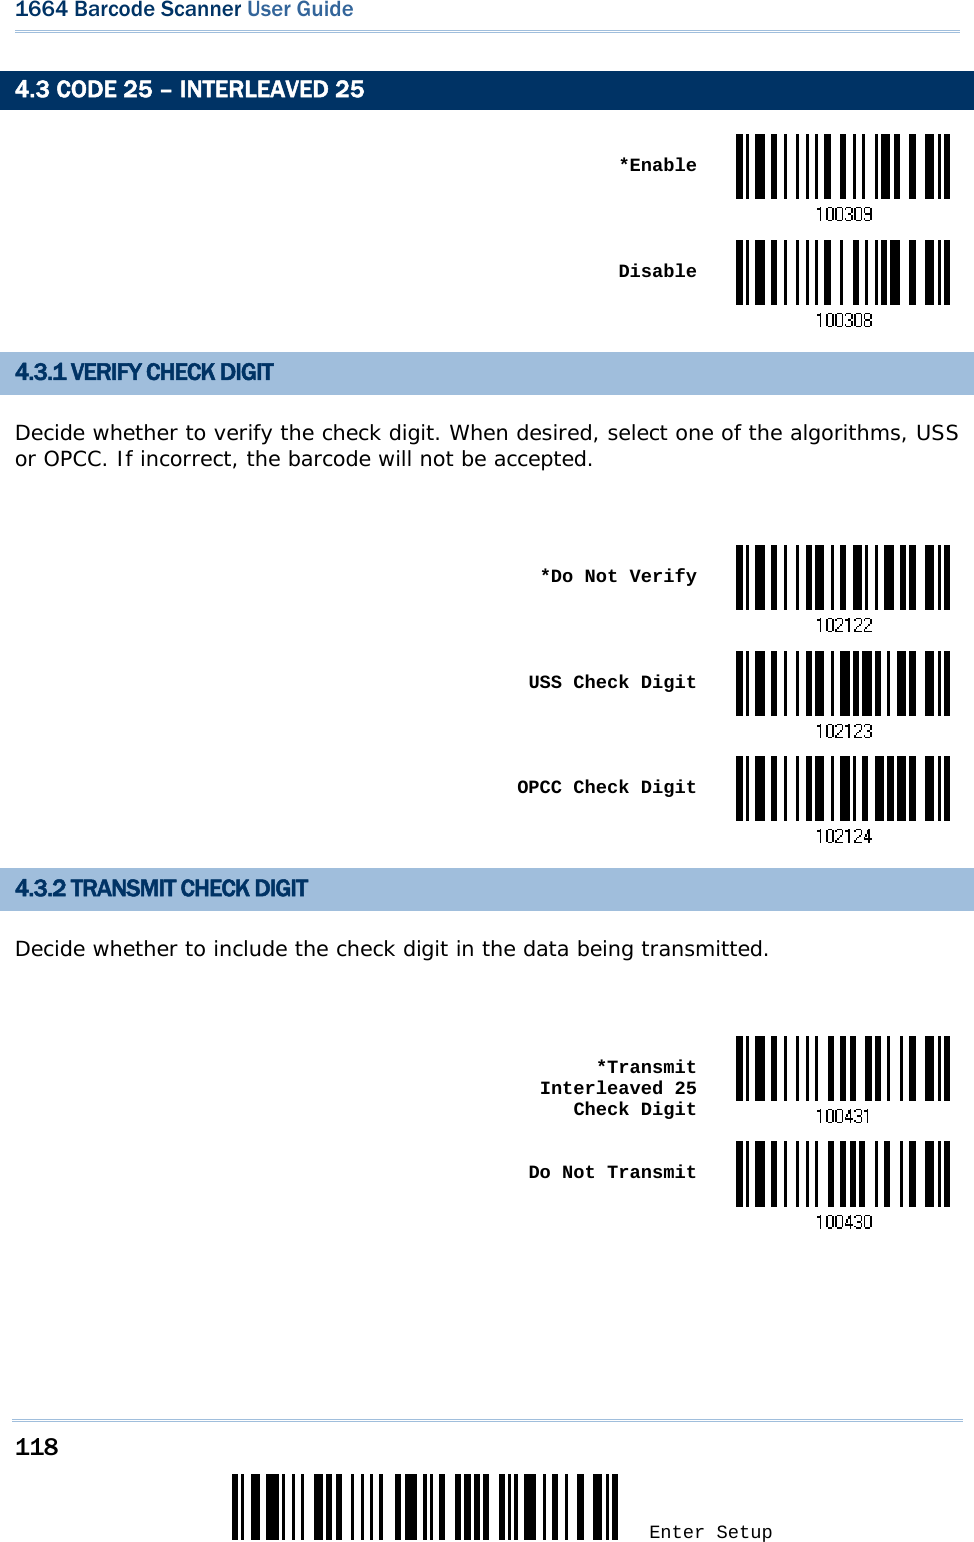 118 Enter Setup 1664 Barcode Scanner User Guide  4.3 CODE 25 – INTERLEAVED 25  *Enable Disable4.3.1 VERIFY CHECK DIGIT Decide whether to verify the check digit. When desired, select one of the algorithms, USS or OPCC. If incorrect, the barcode will not be accepted.   *Do Not Verify USS Check Digit OPCC Check Digit4.3.2 TRANSMIT CHECK DIGIT Decide whether to include the check digit in the data being transmitted.   *Transmit Interleaved 25  Check Digit Do Not Transmit     